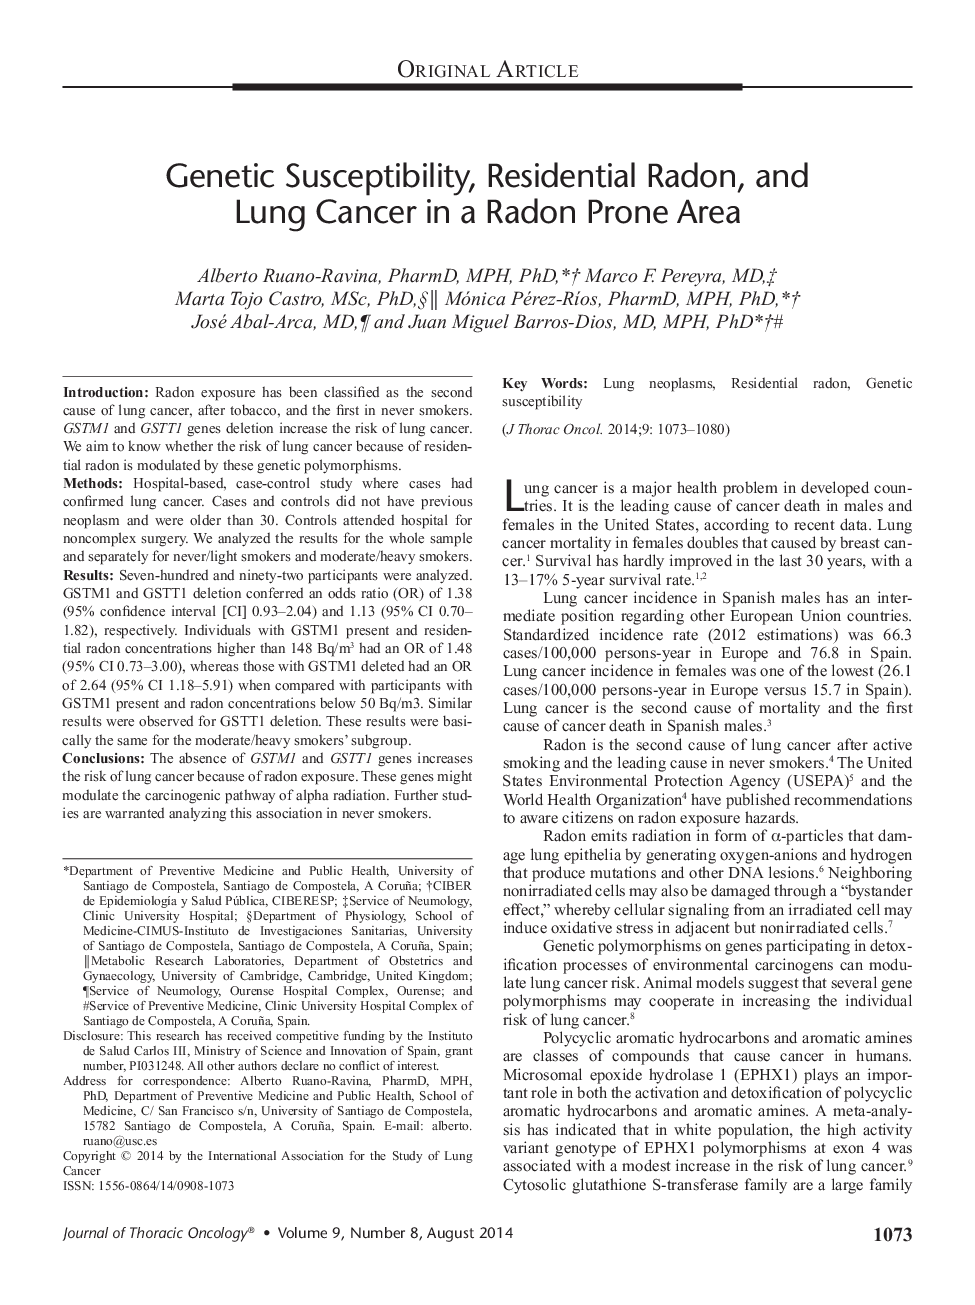 Genetic Susceptibility, Residential Radon, and Lung Cancer in a Radon Prone Area 